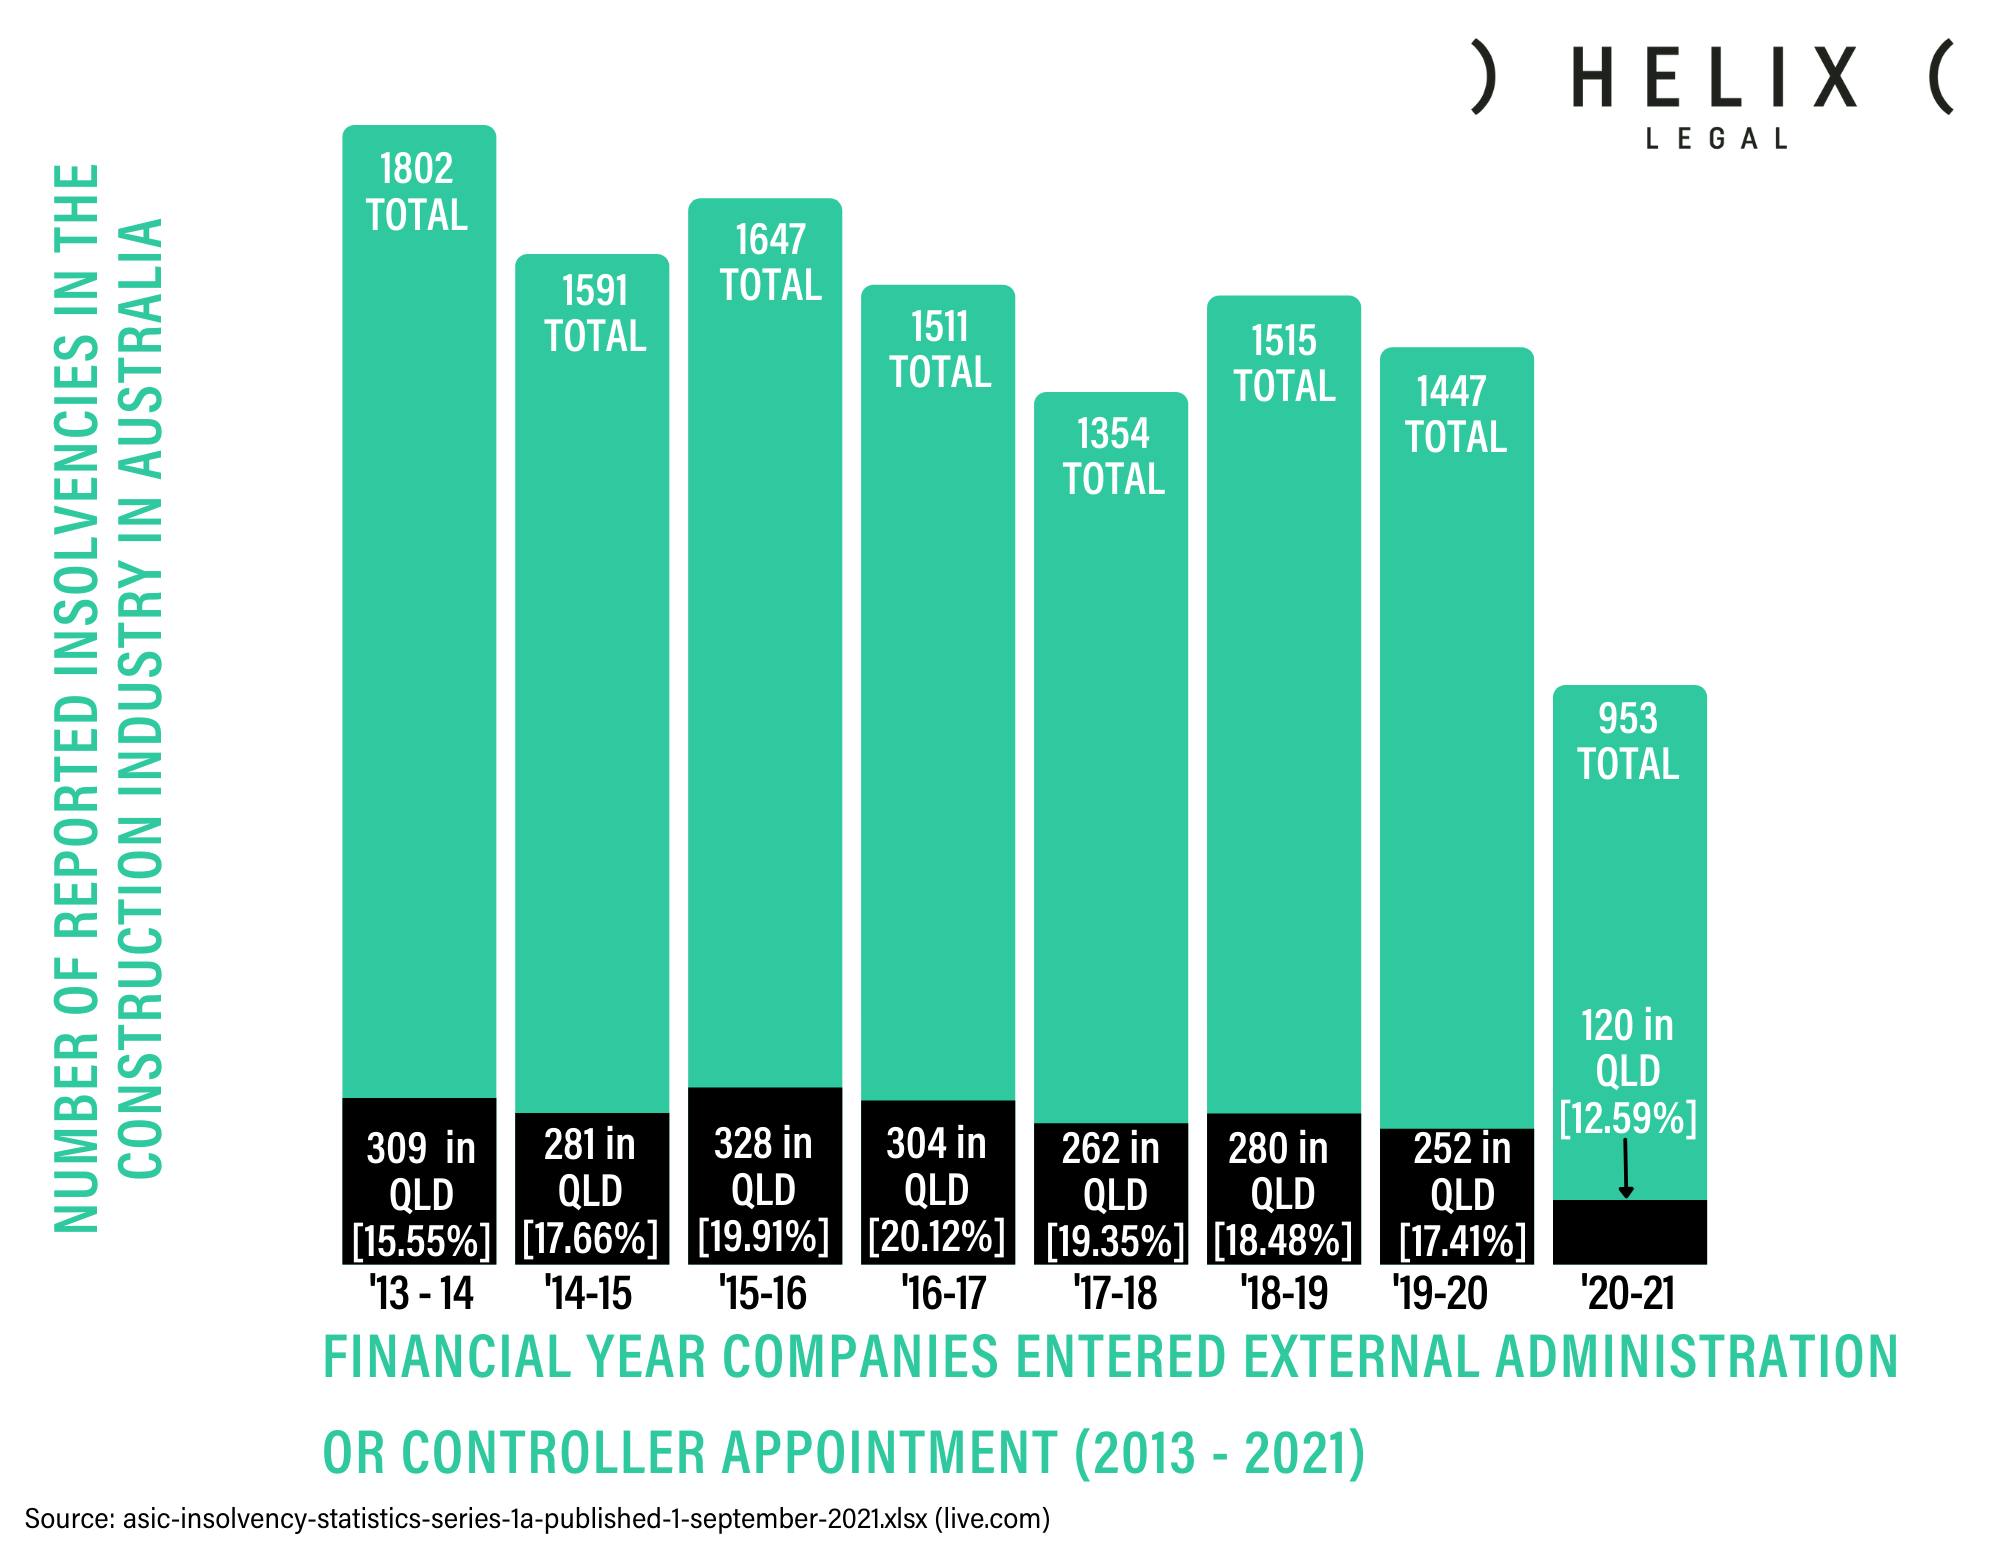 Financial year companies entered external administration or controller appointment (2013-2021)